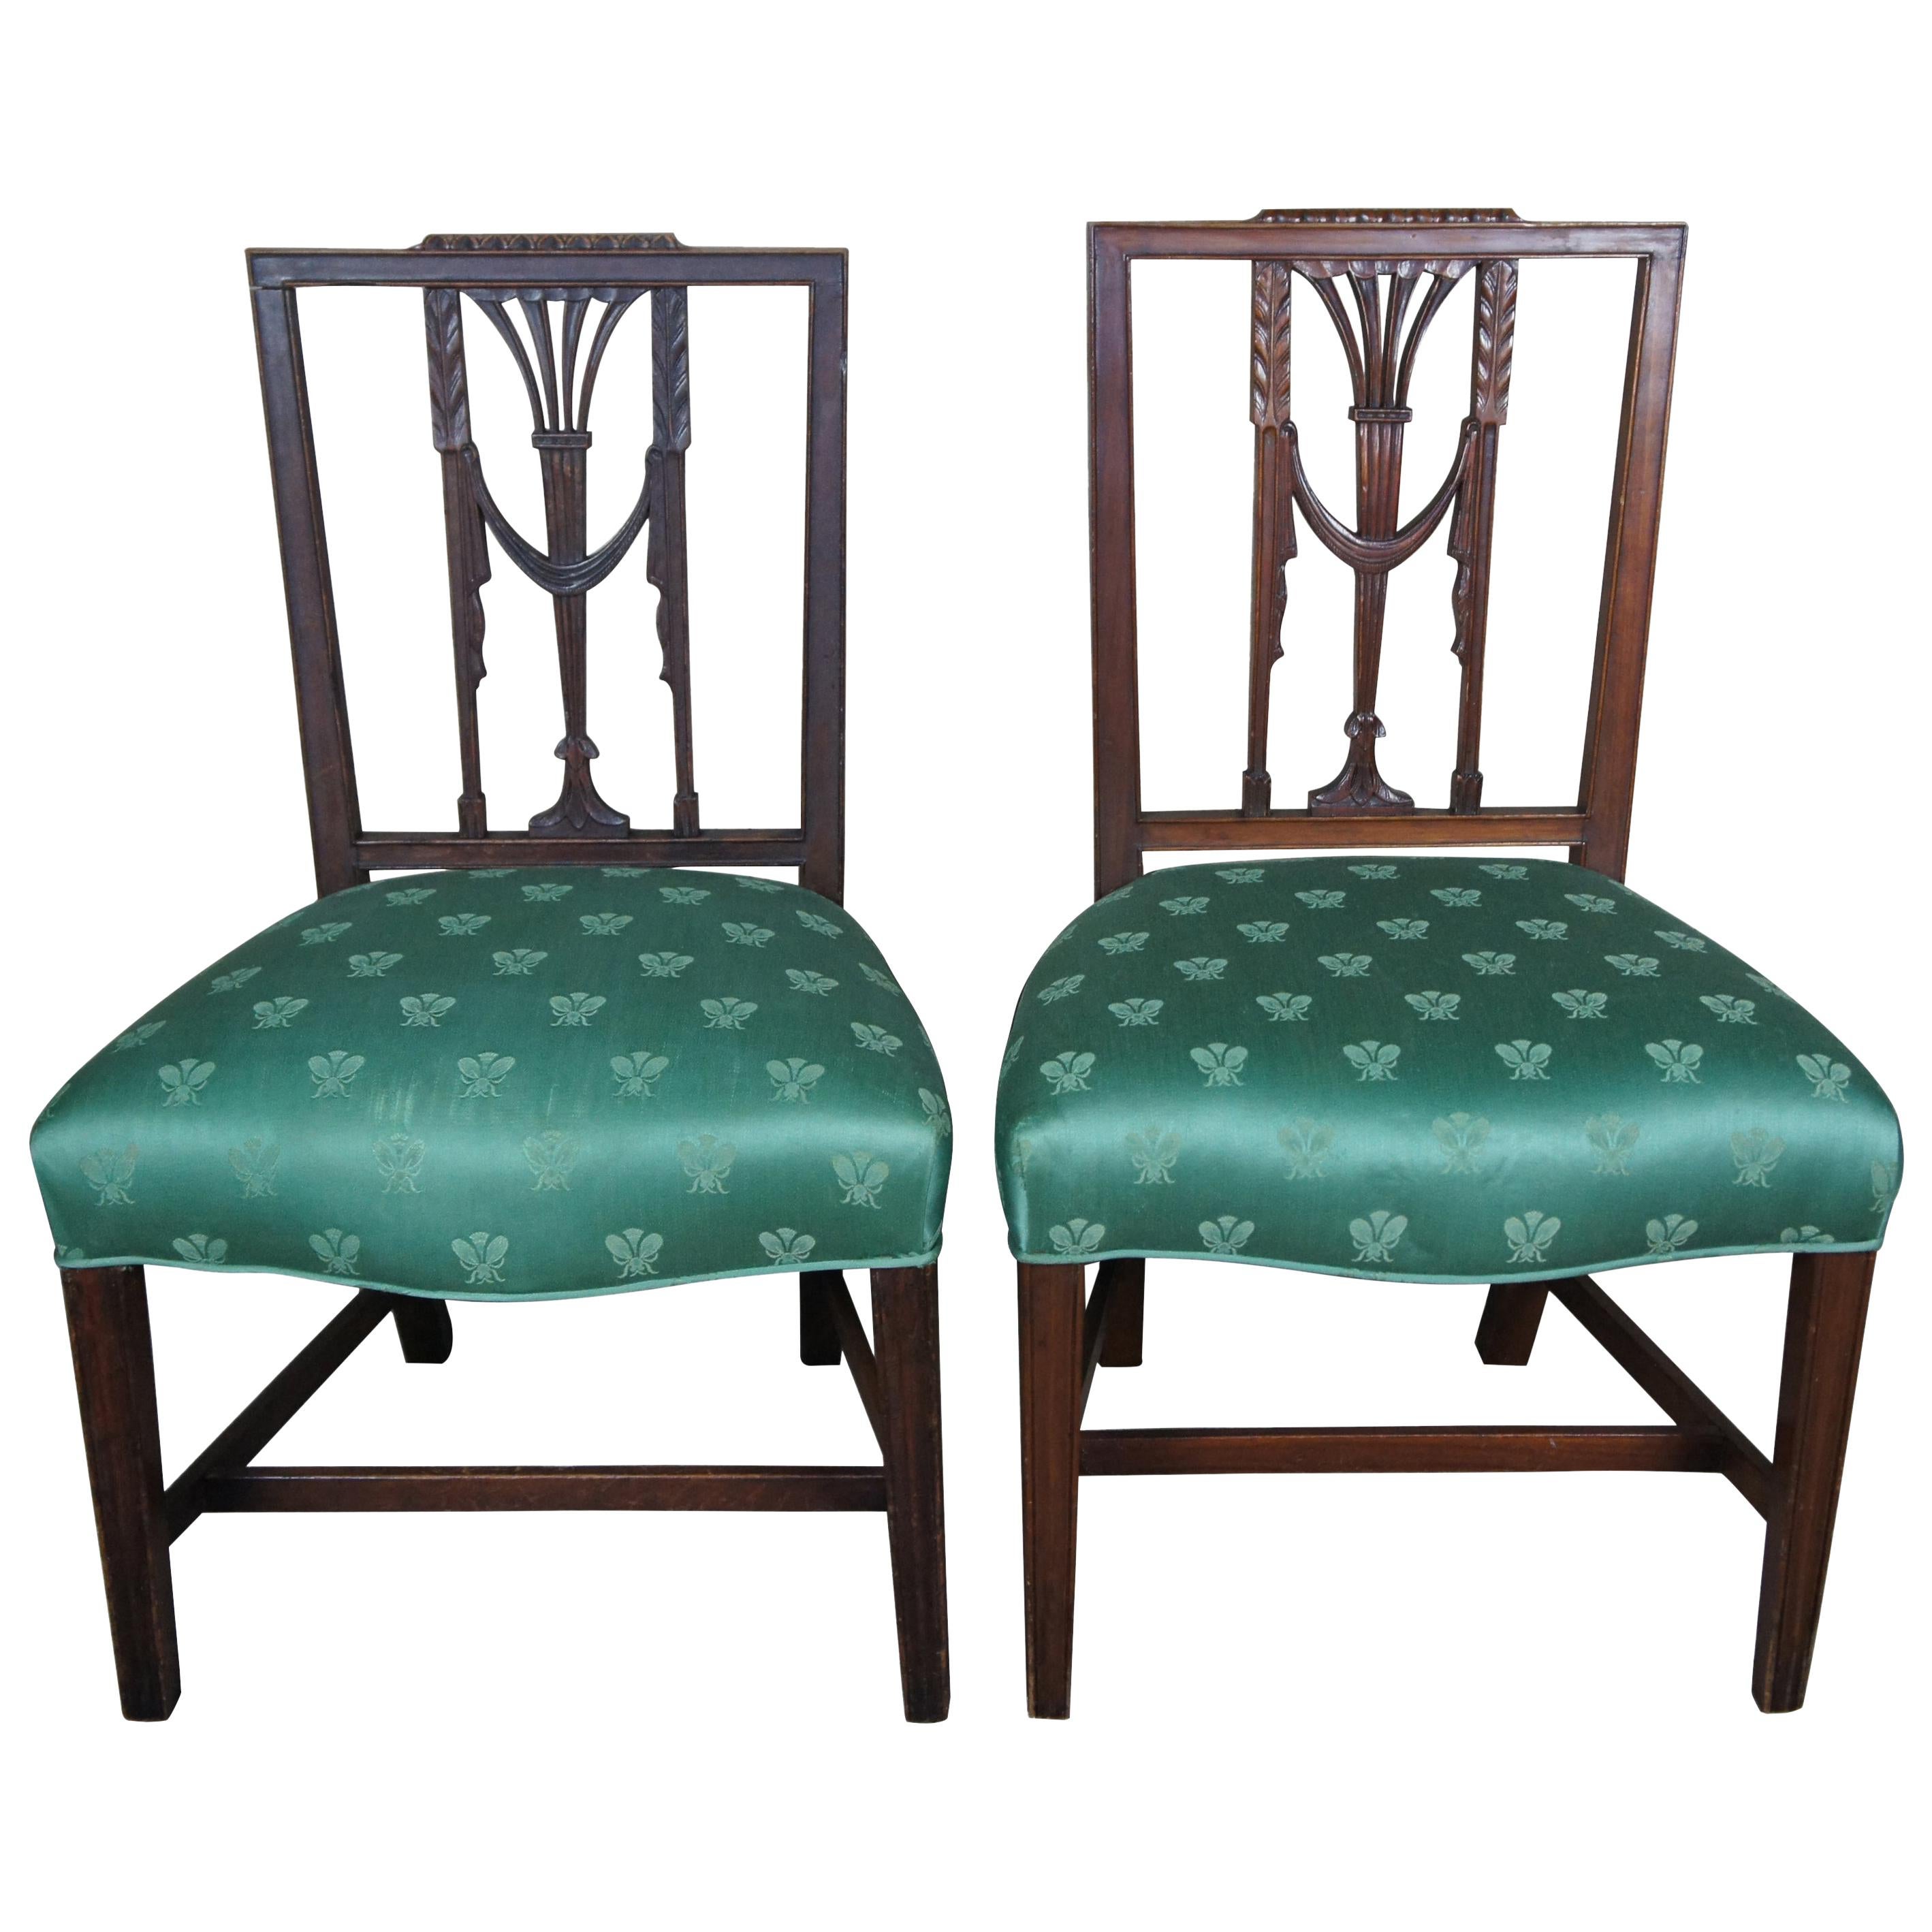 2 Baker Furniture Hepplewhite Square Back Chairs Sheraton Parlor Dining Side